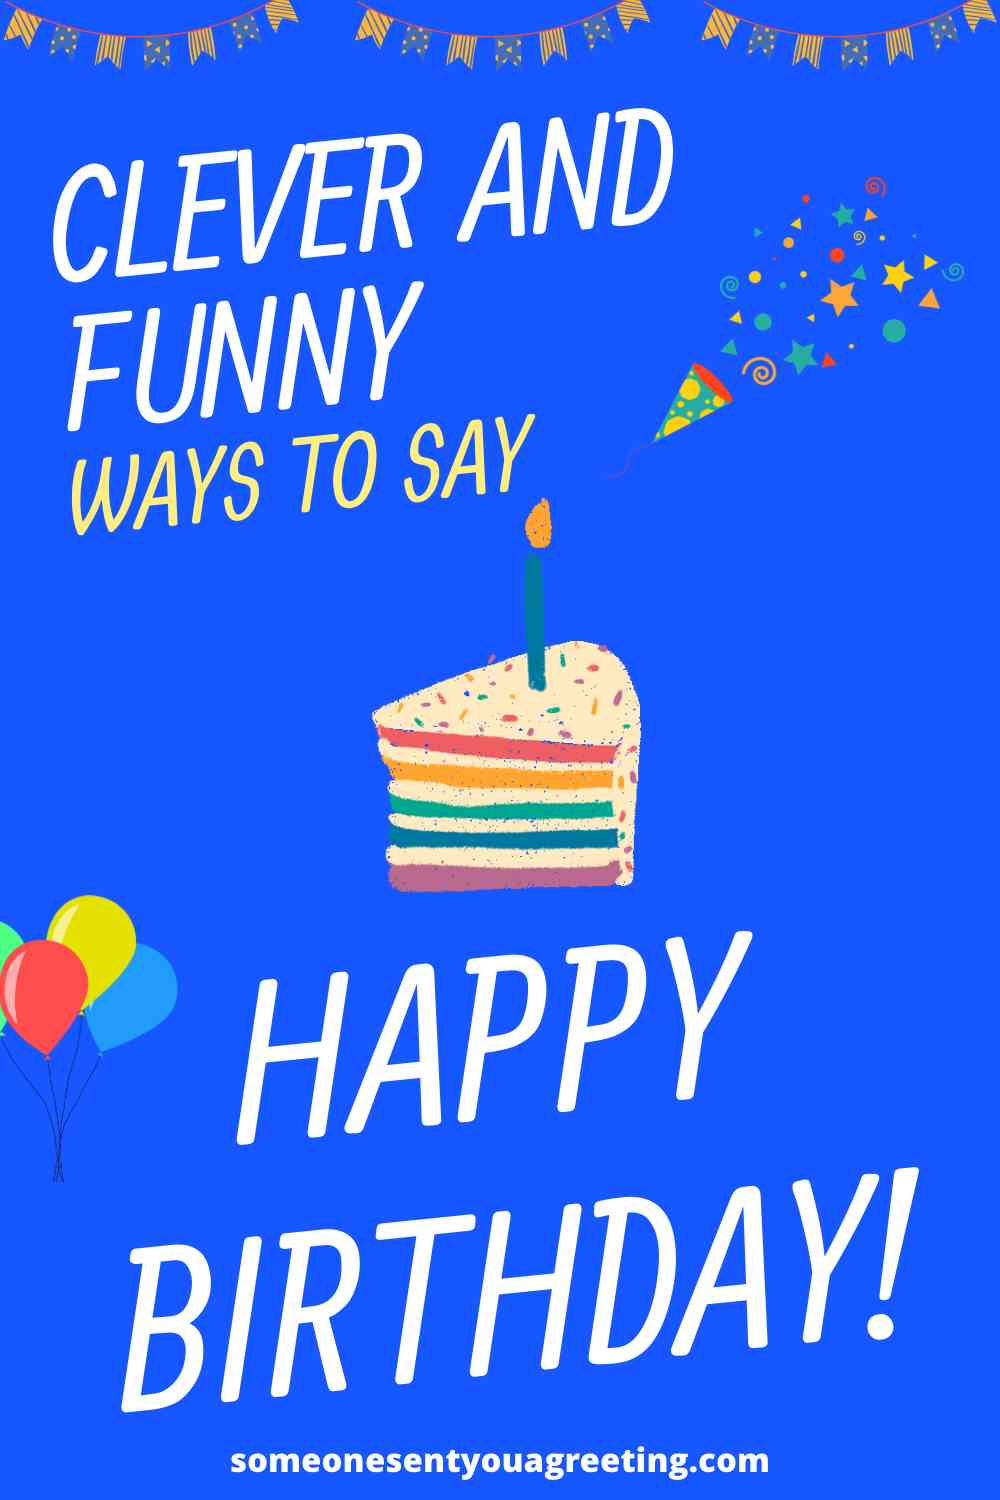 45 Clever and Funny Ways to Say Happy Birthday - Someone Sent You A Greeting